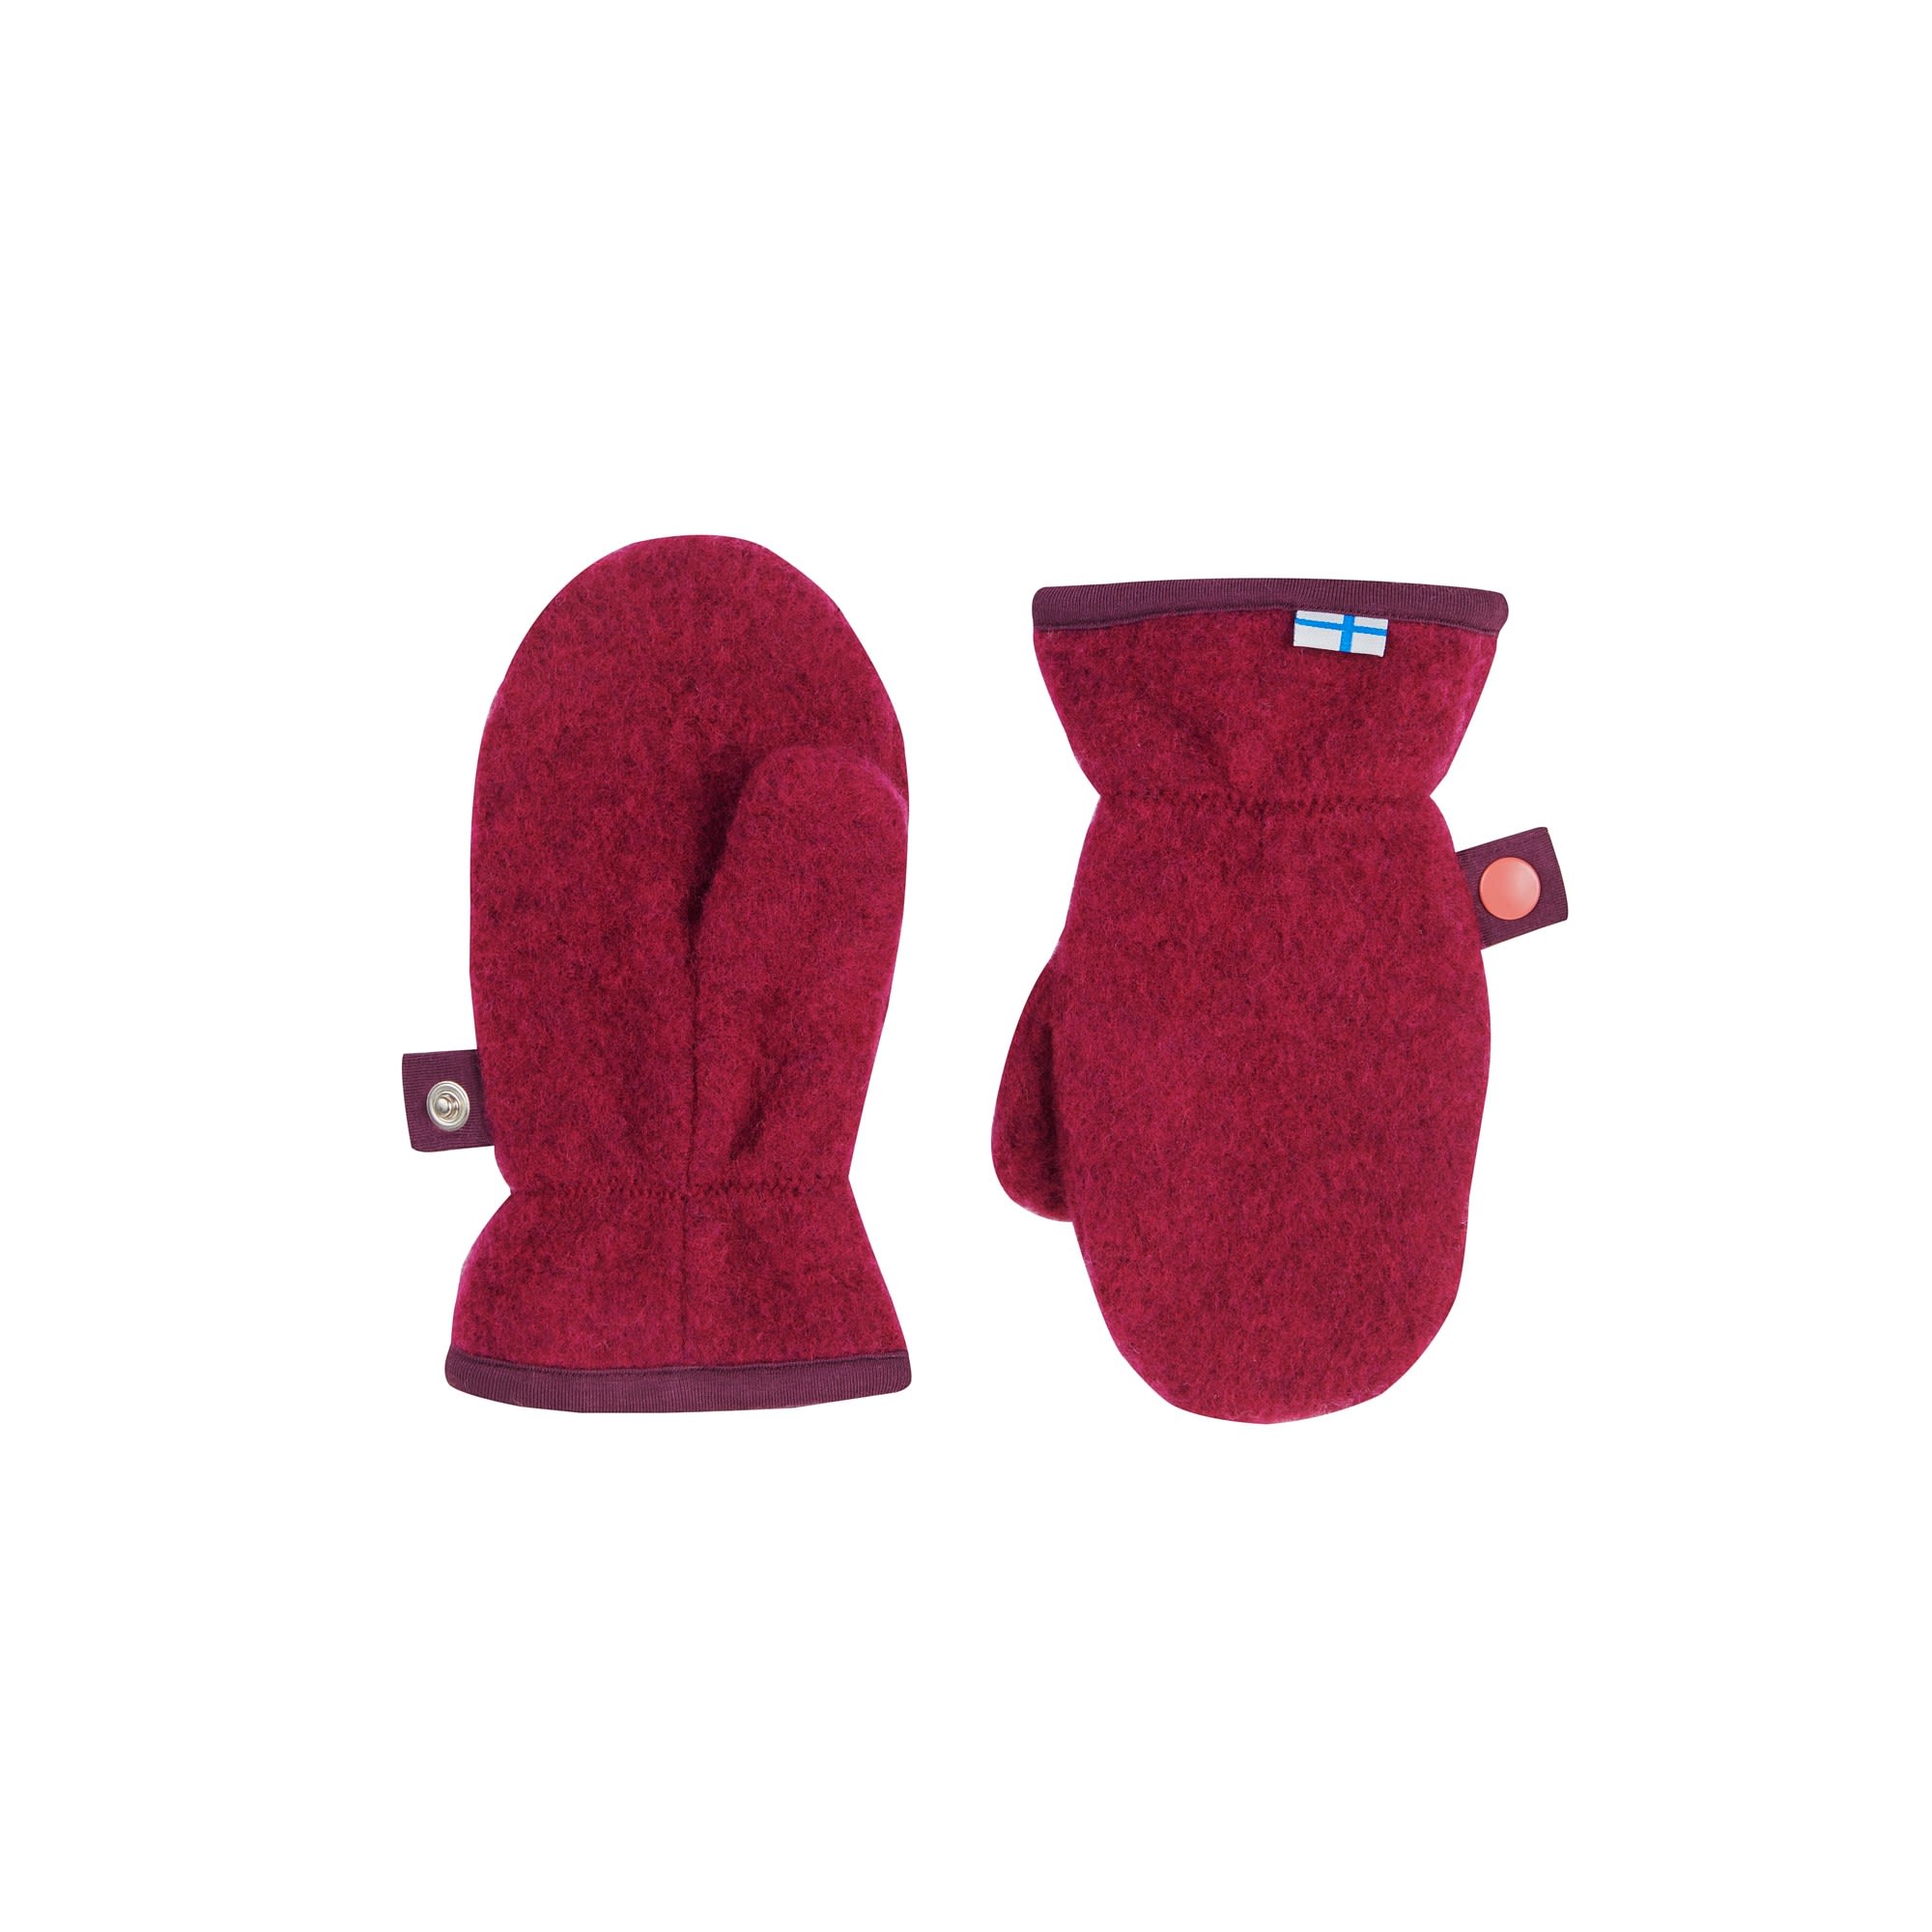 Finkid Nupujussi Wool Rot- Fausthandschuhe- Grsse XS - Farbe Beet Red